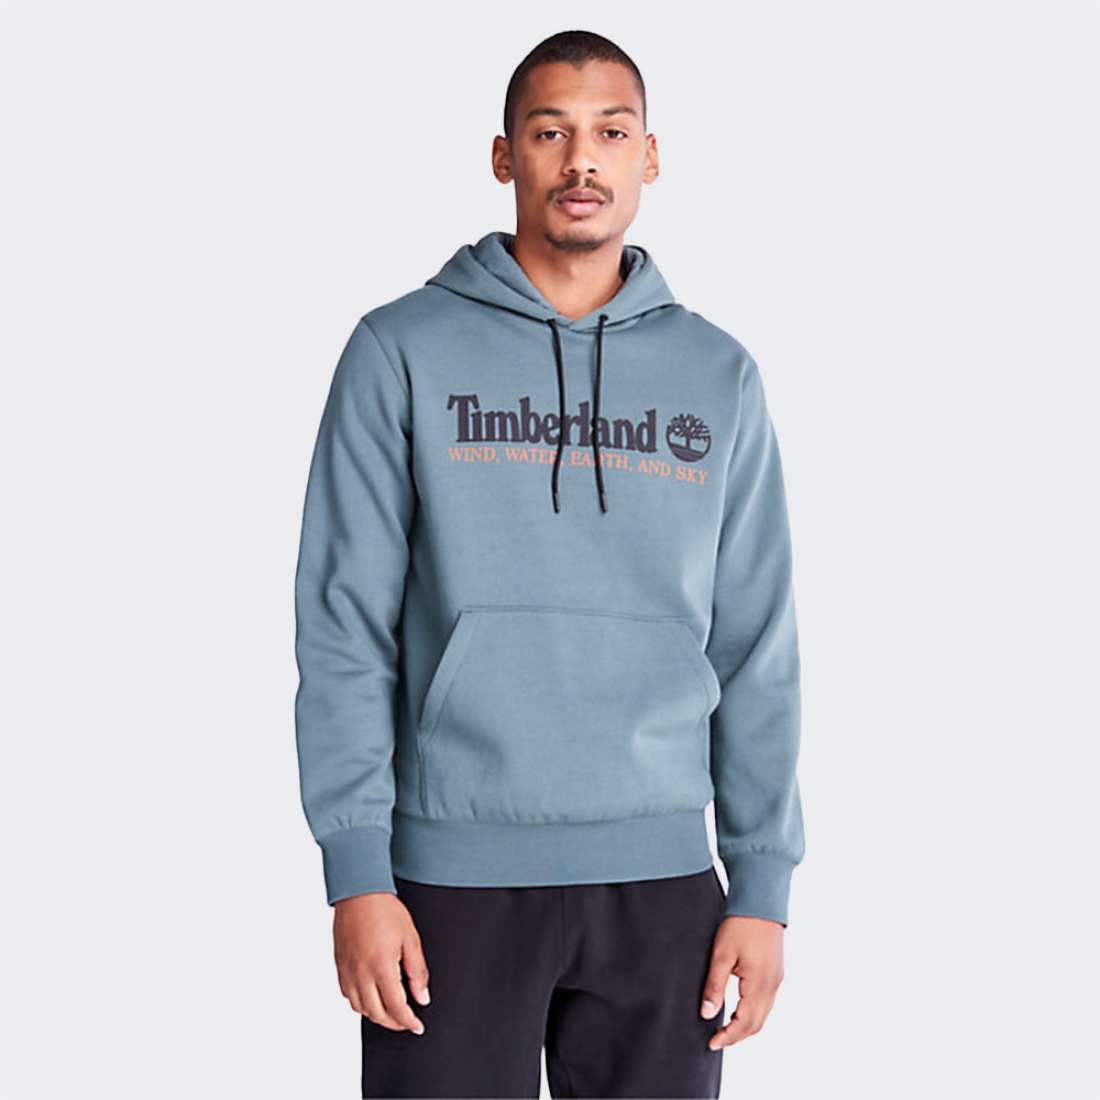 HOODIE TIMBERLAND WIND, WATER, EARTH AND SKY BALSAM GREEN